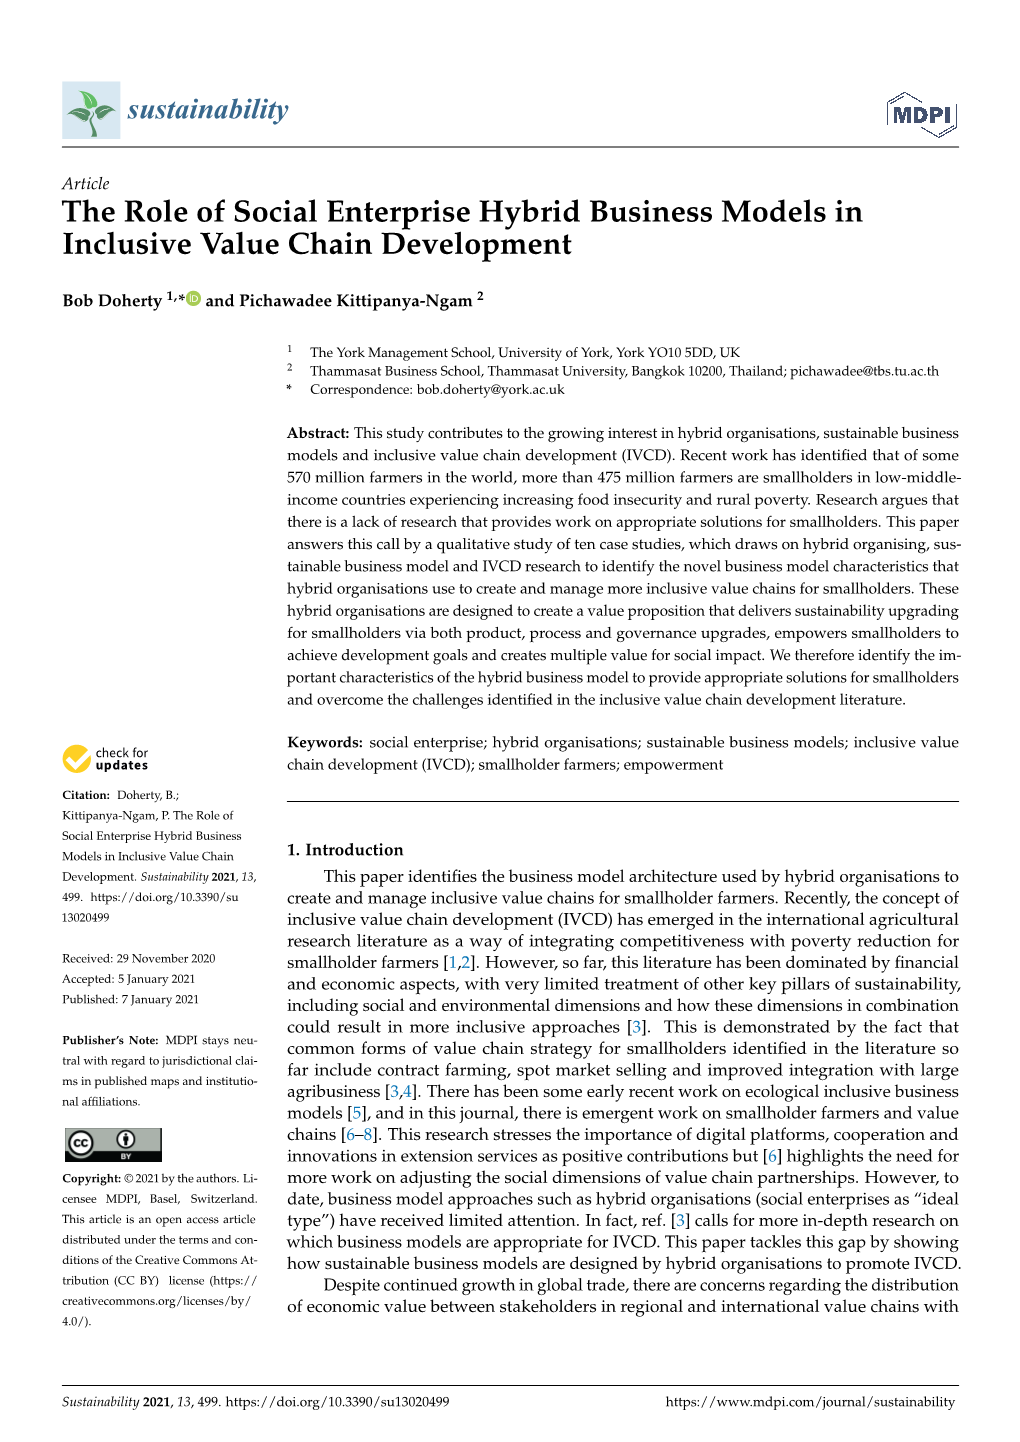 The Role of Social Enterprise Hybrid Business Models in Inclusive Value Chain Development